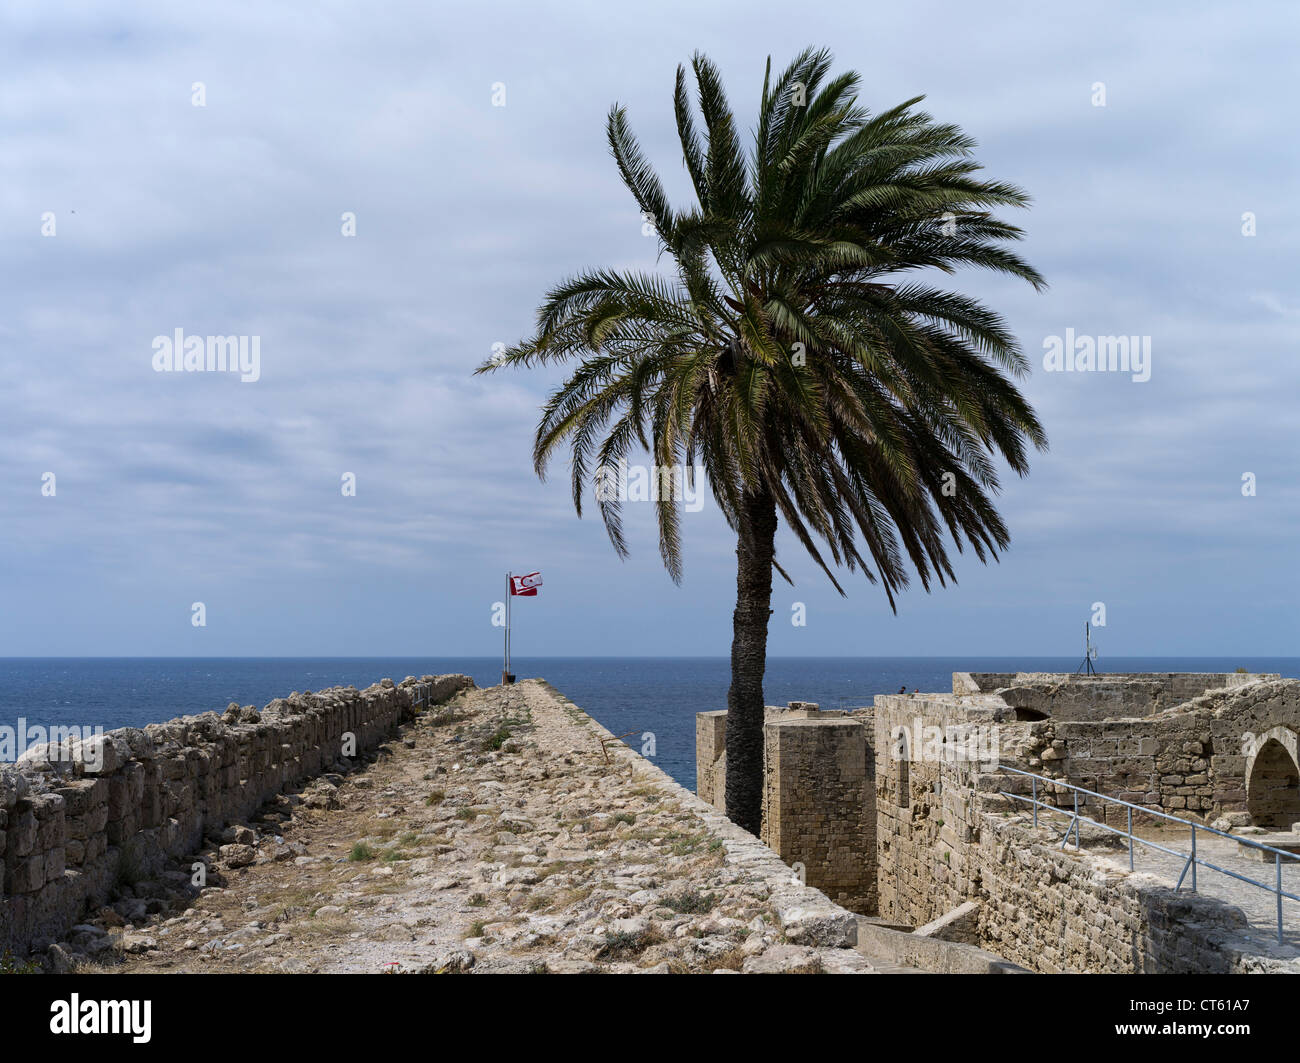 dh Girne Castle KYRENIA NORTHERN CYPRUS Venetian castle walls and palm tree fortification venitian wall north Stock Photo